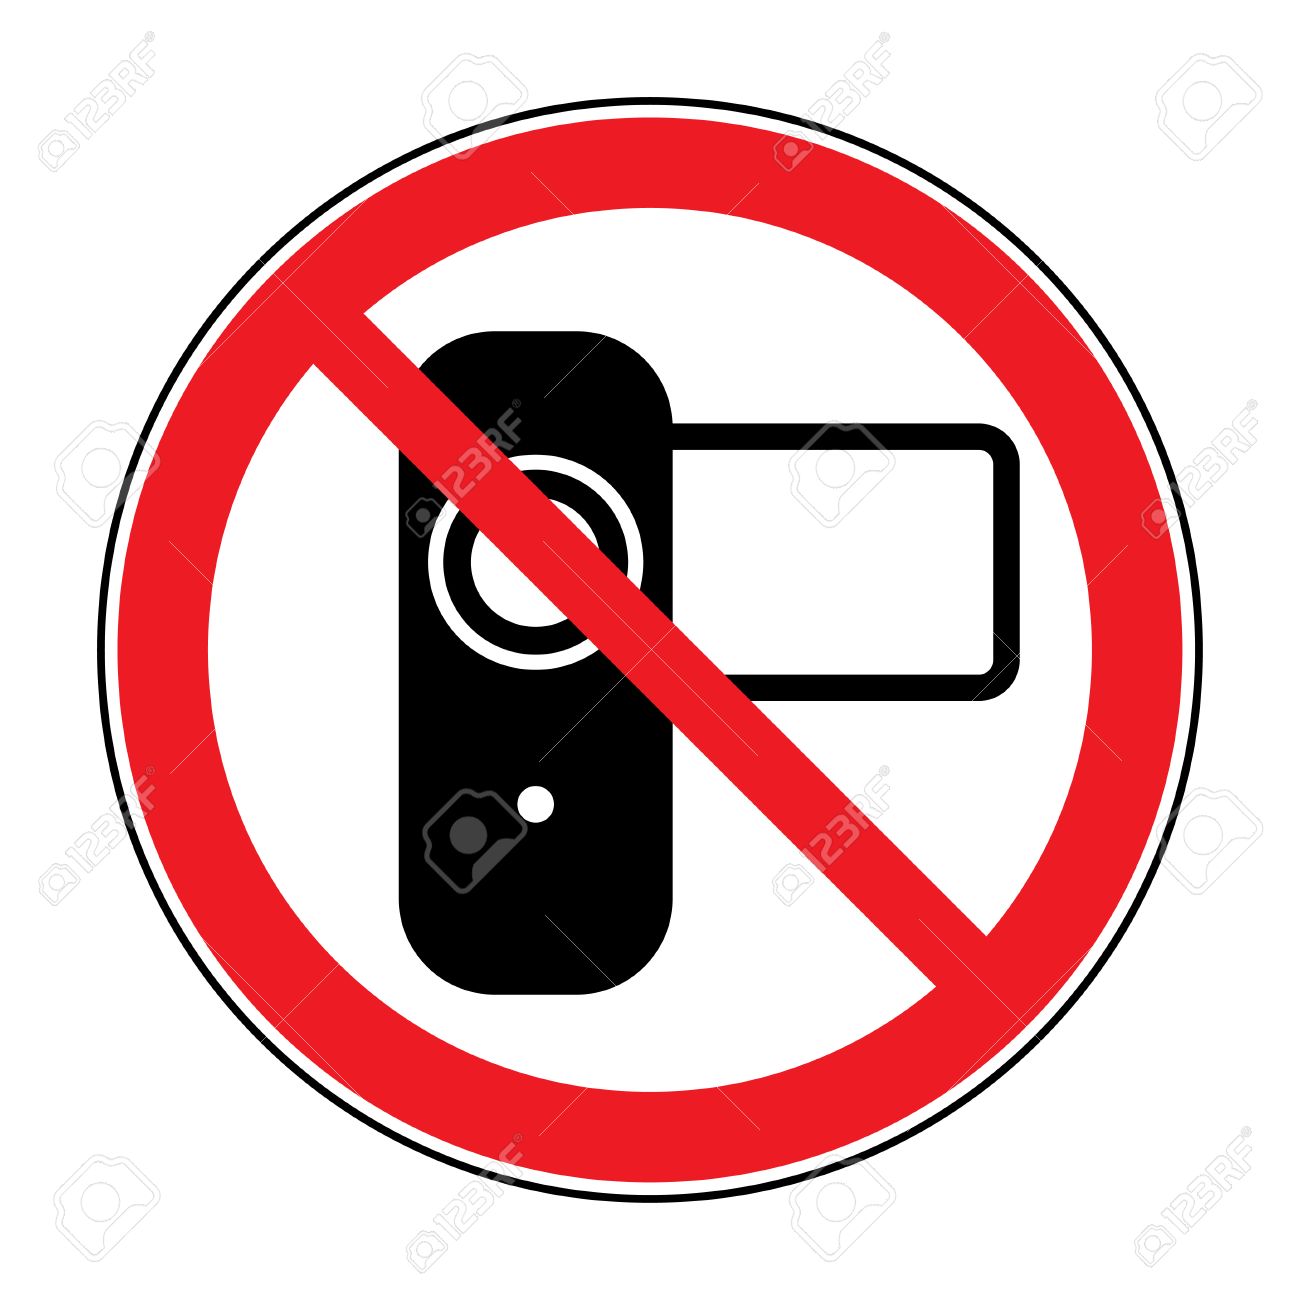 No camera icon isometric 3d style Royalty Free Vector Image